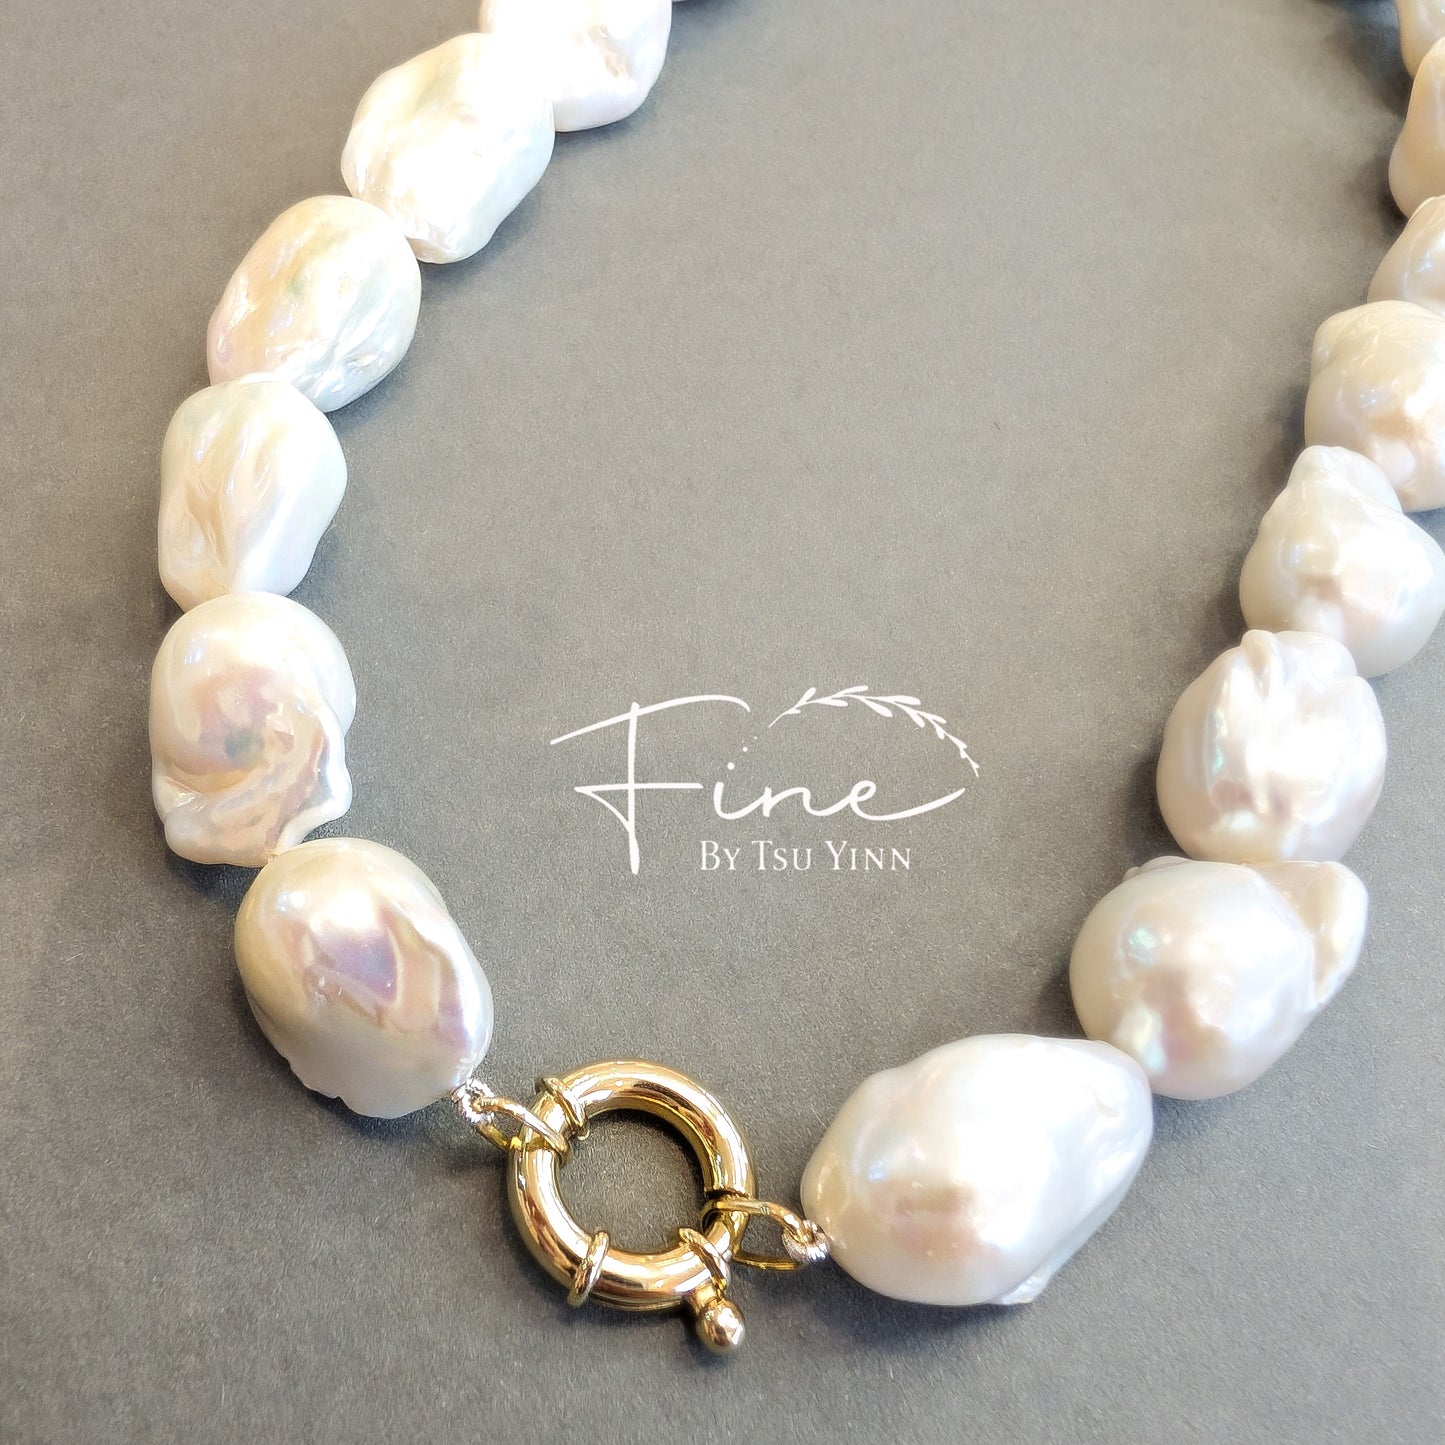 14K YG 15-18mm White Baroque Pearl Necklace